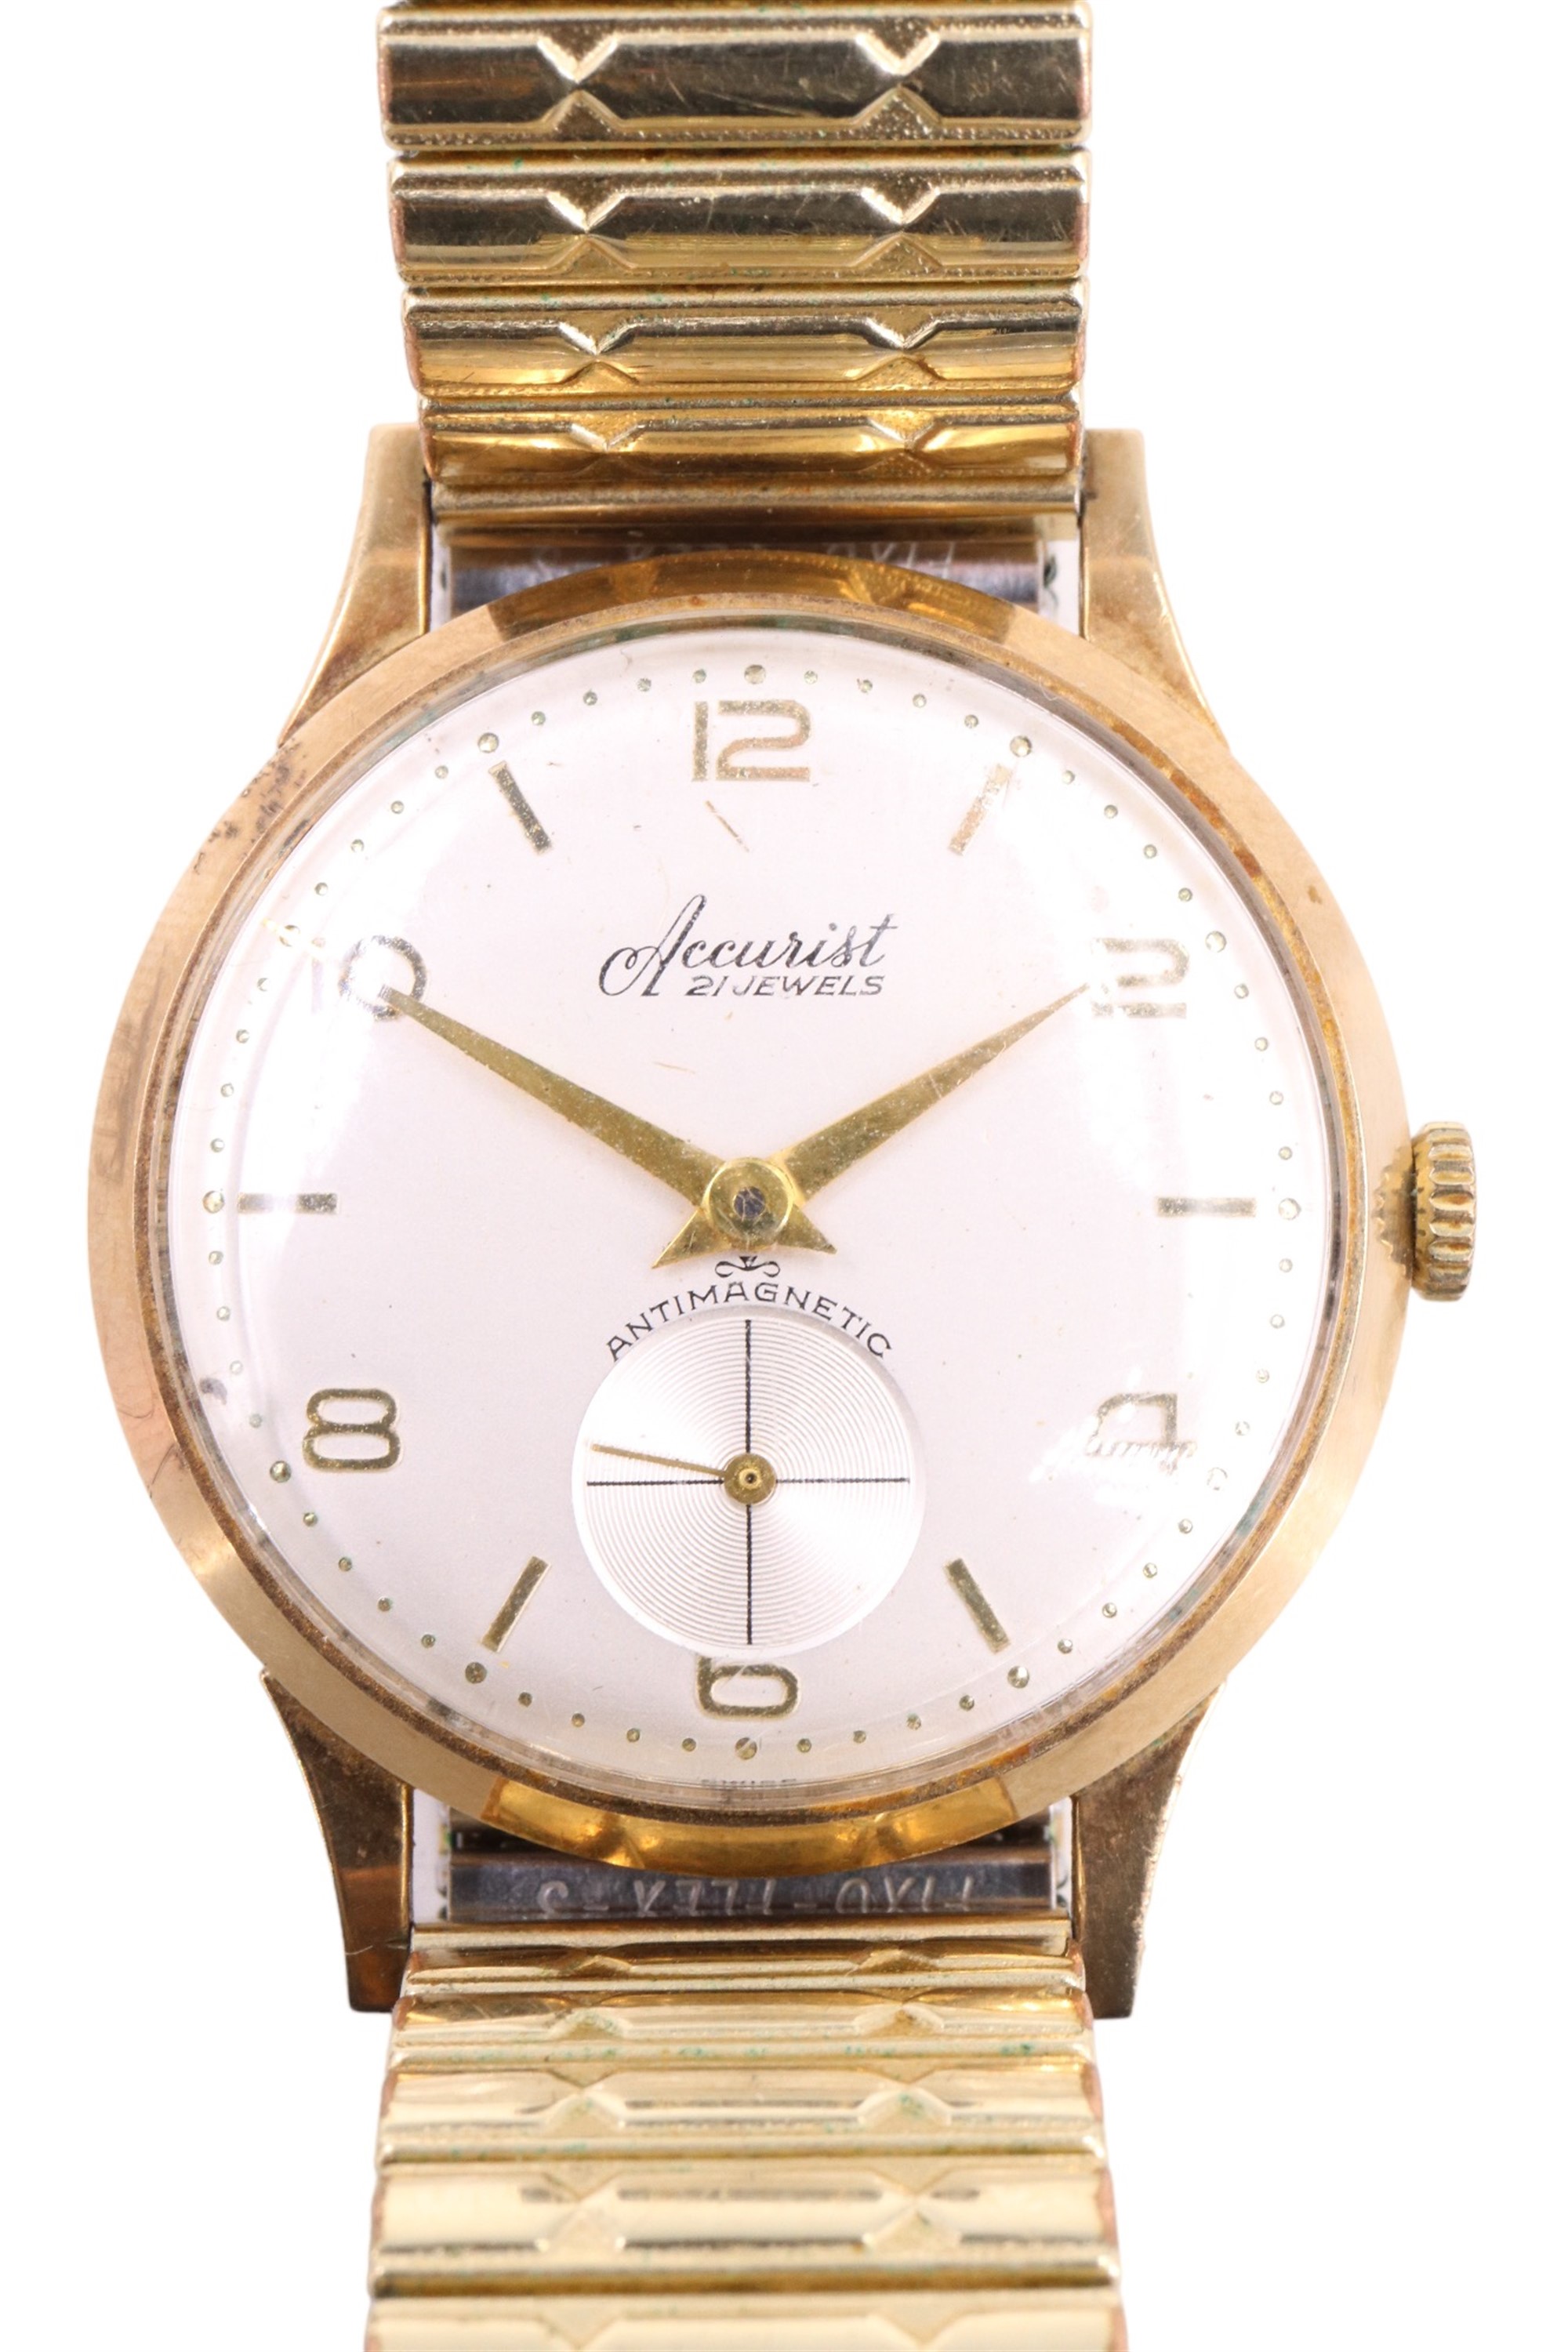 A cased 1960s Accurist 9 ct gold wristwatch, having a crown-wound 21 jewel movement, gilt dauphine